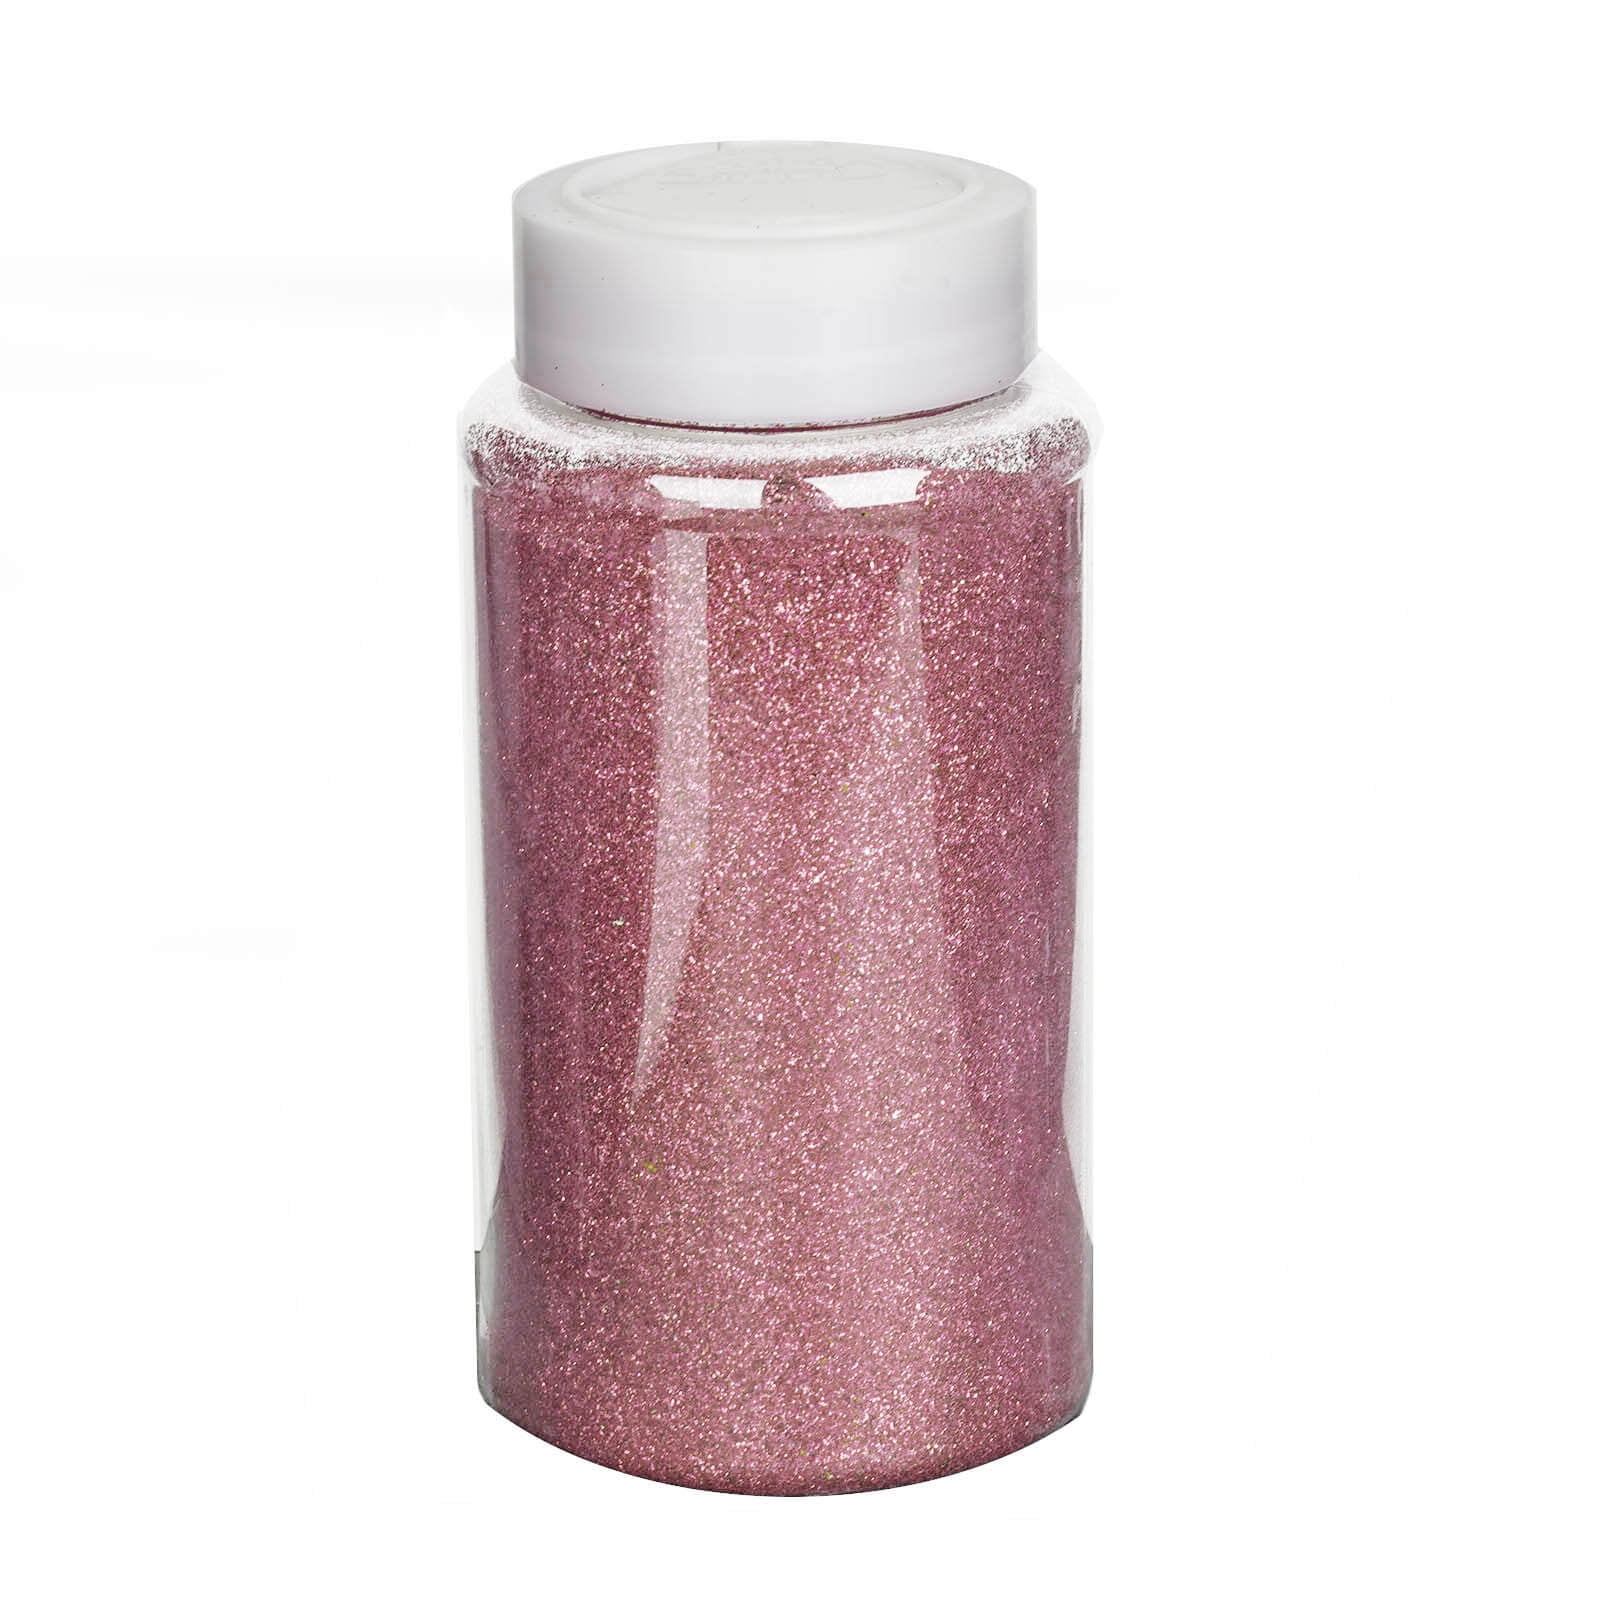 Spectra Non-Toxic Glitter Crystal, 1 lb Jar, Clear